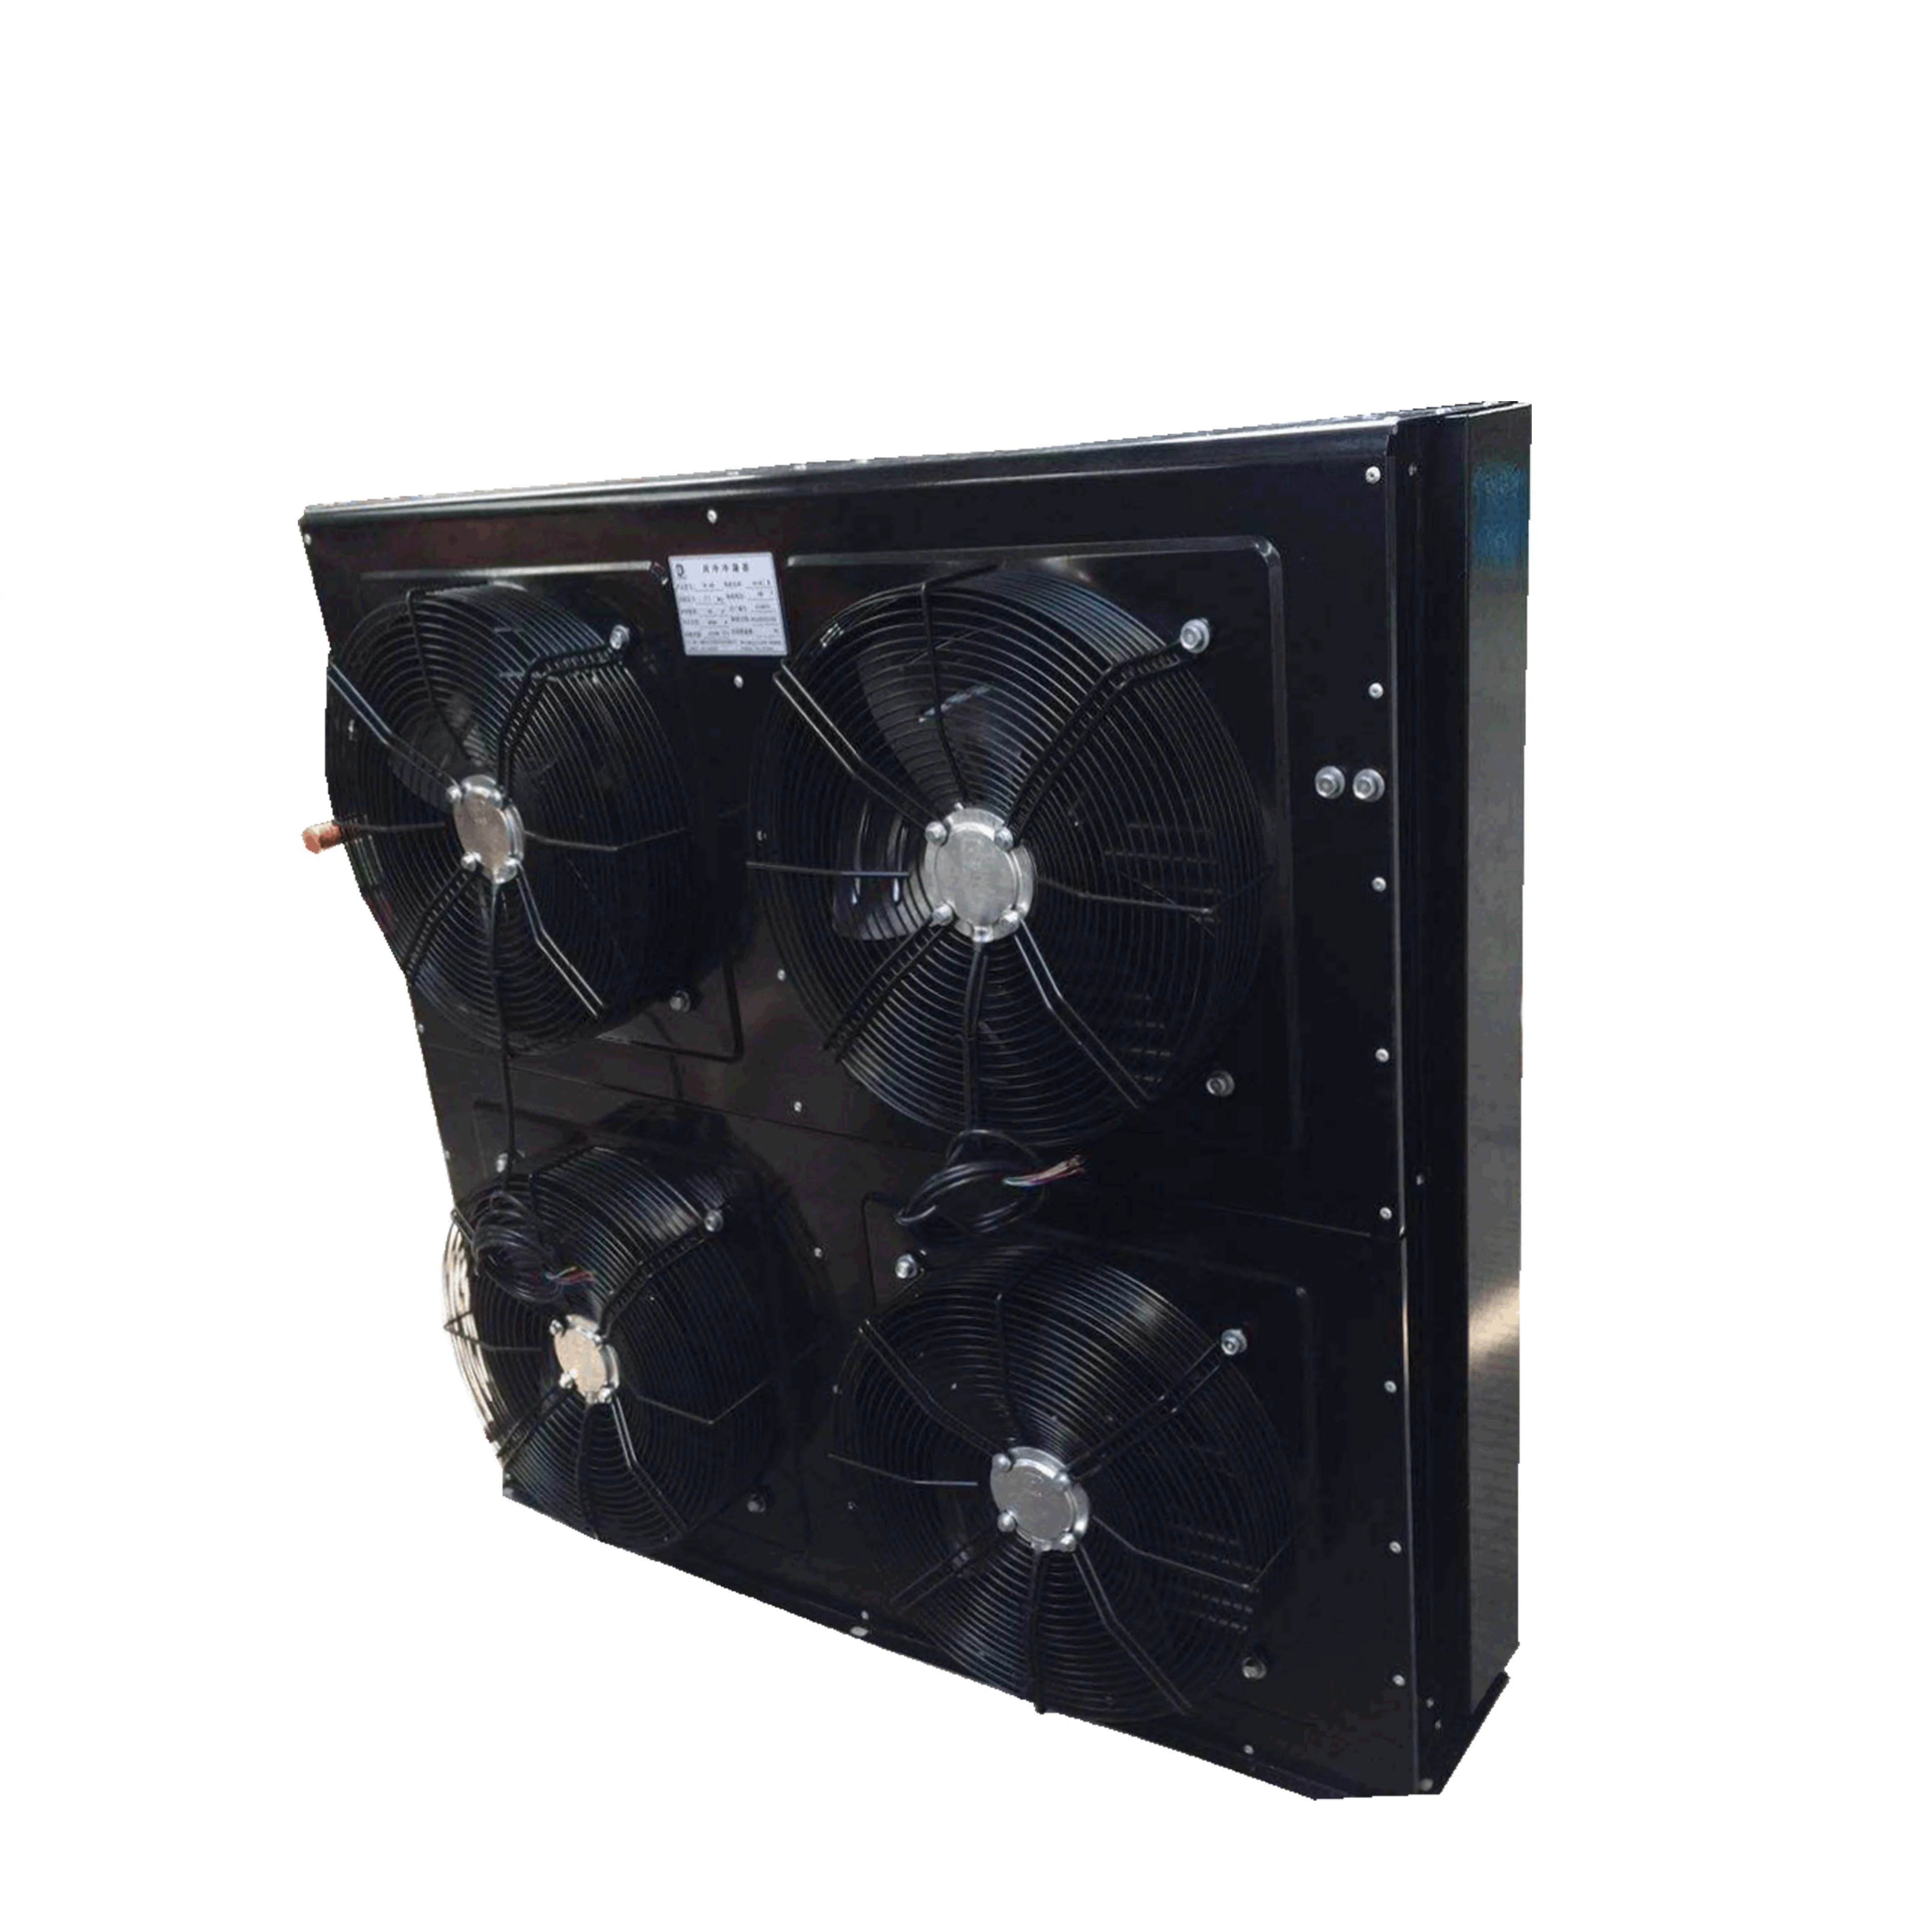 Hot selling air-cooled condenser/air-cooled refrigerant condenser/cooled condenser in refrigeration system